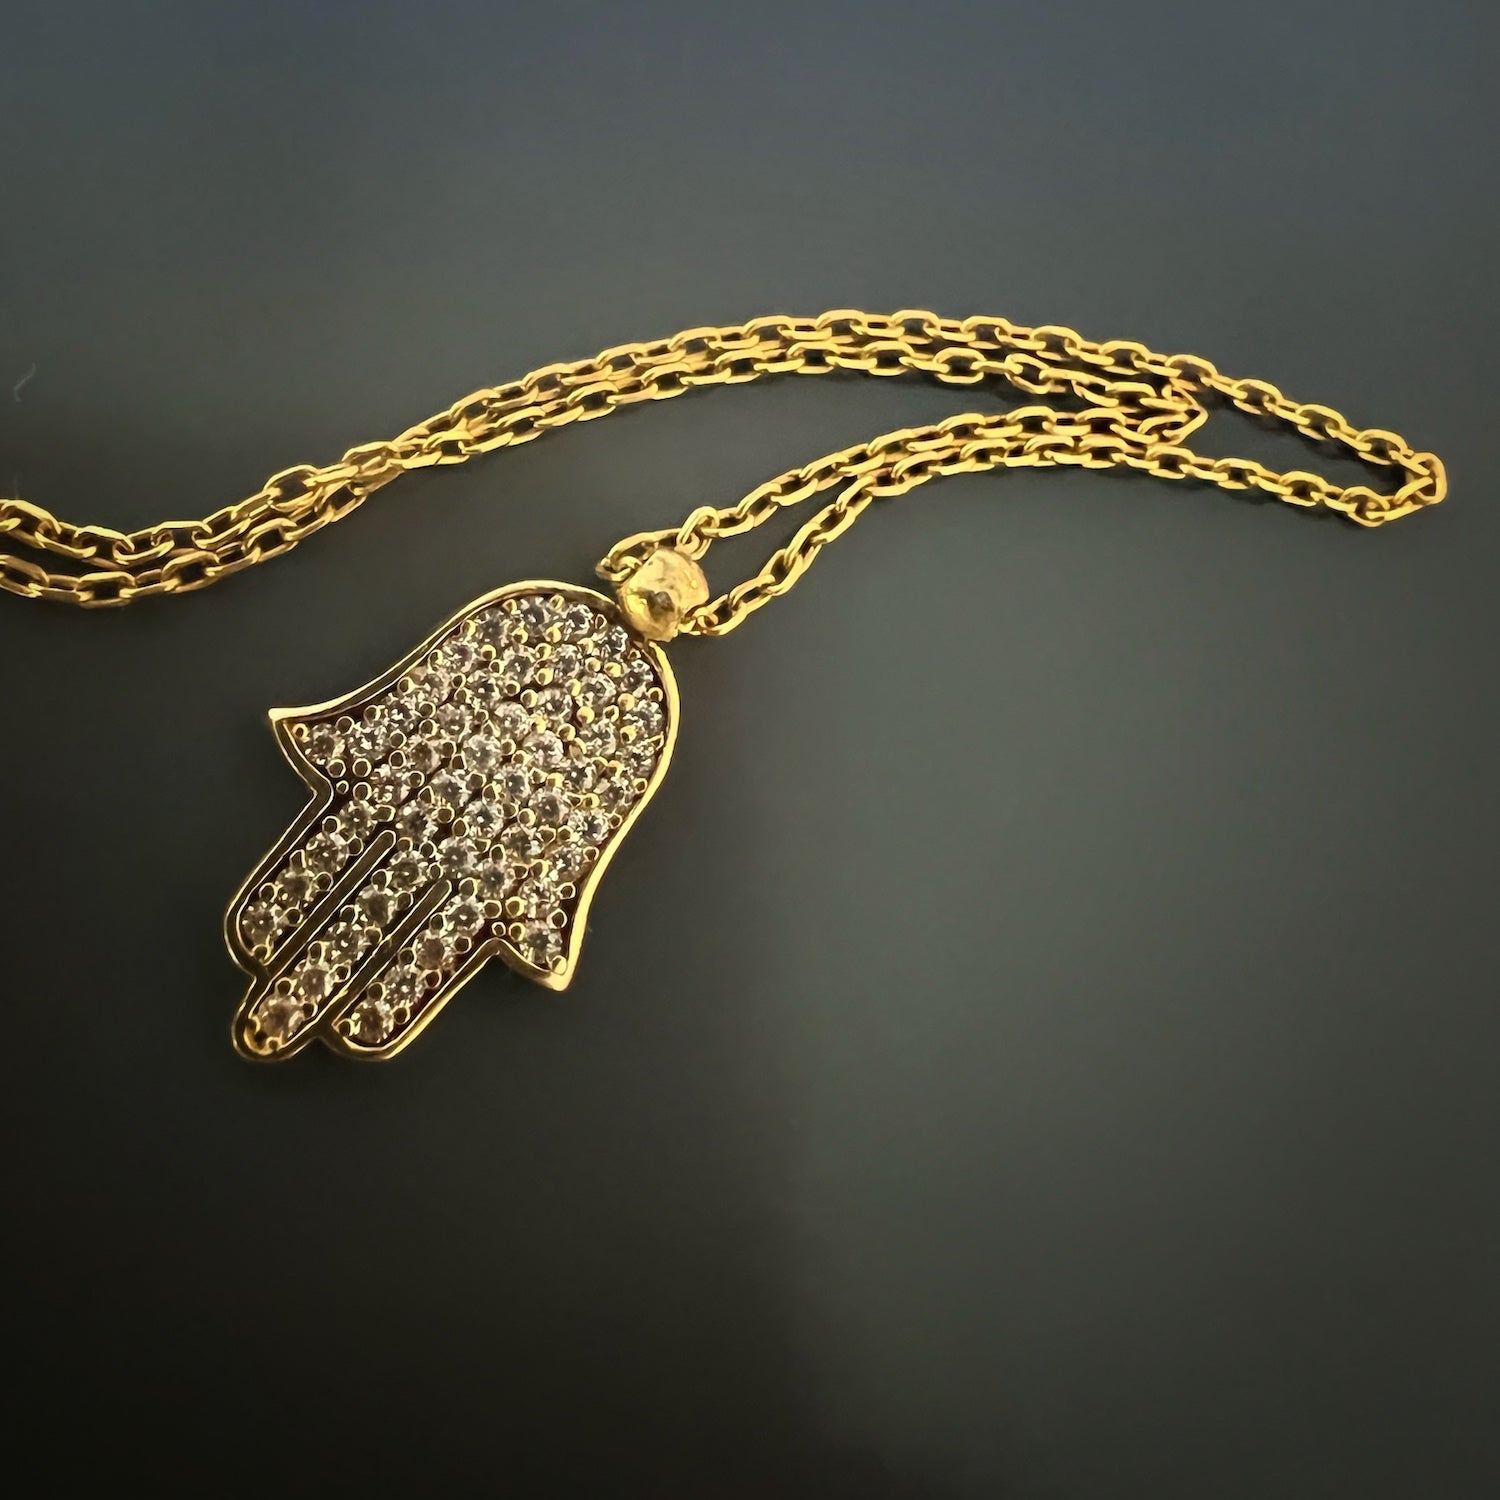 Hamsa Pendant Necklace - Discover the power of protection with this beautifully crafted Hamsa pendant necklace, available in sterling silver or gold plated.